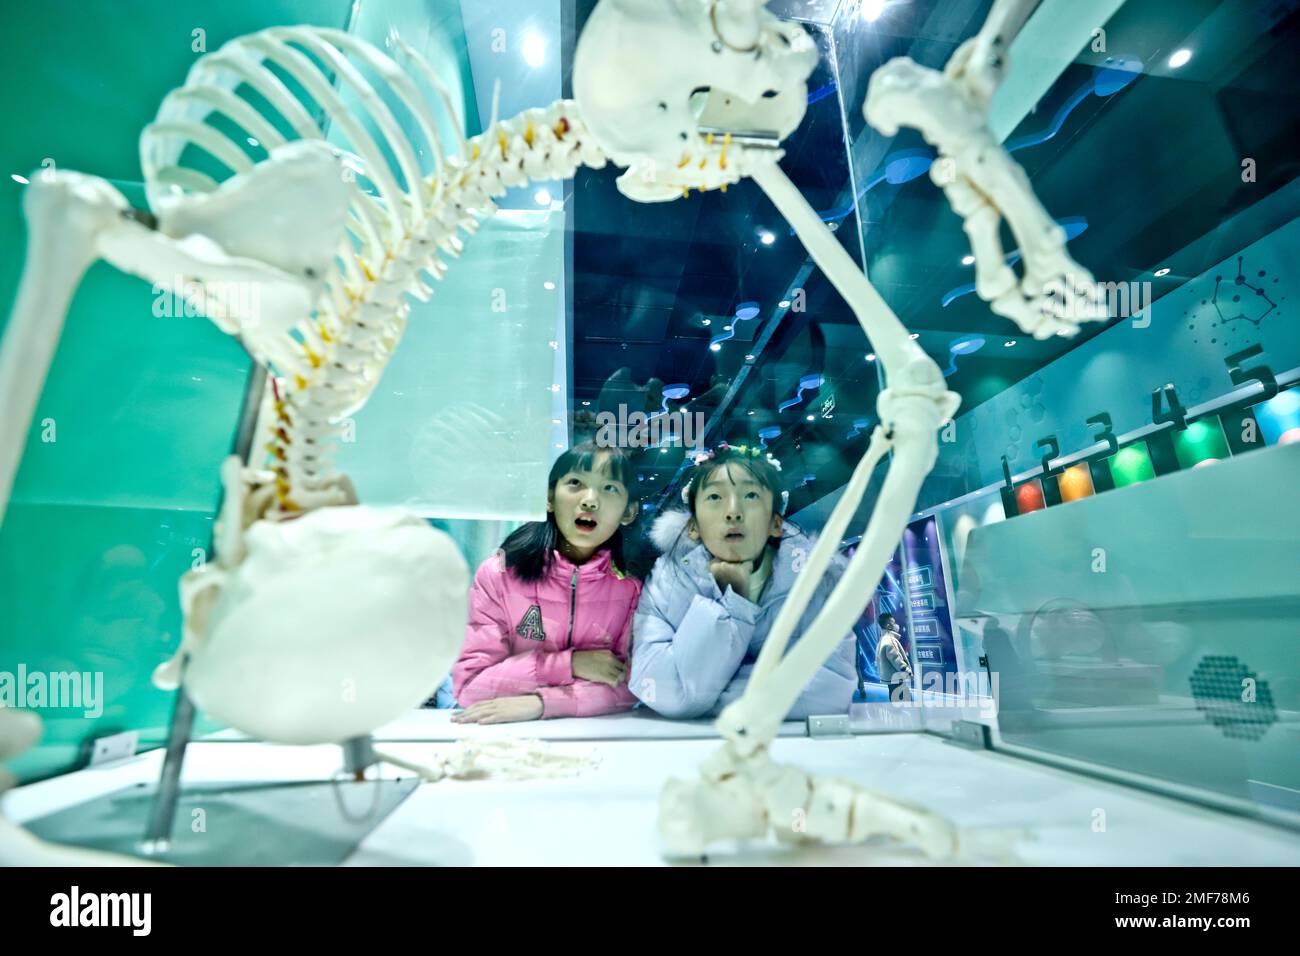 ZHANGYE, CHINA - JANUARY 24, 2023 - Children look at human bone specimens at Zhangye Science and Technology Museum in Linze county of Zhangye city, No Stock Photo